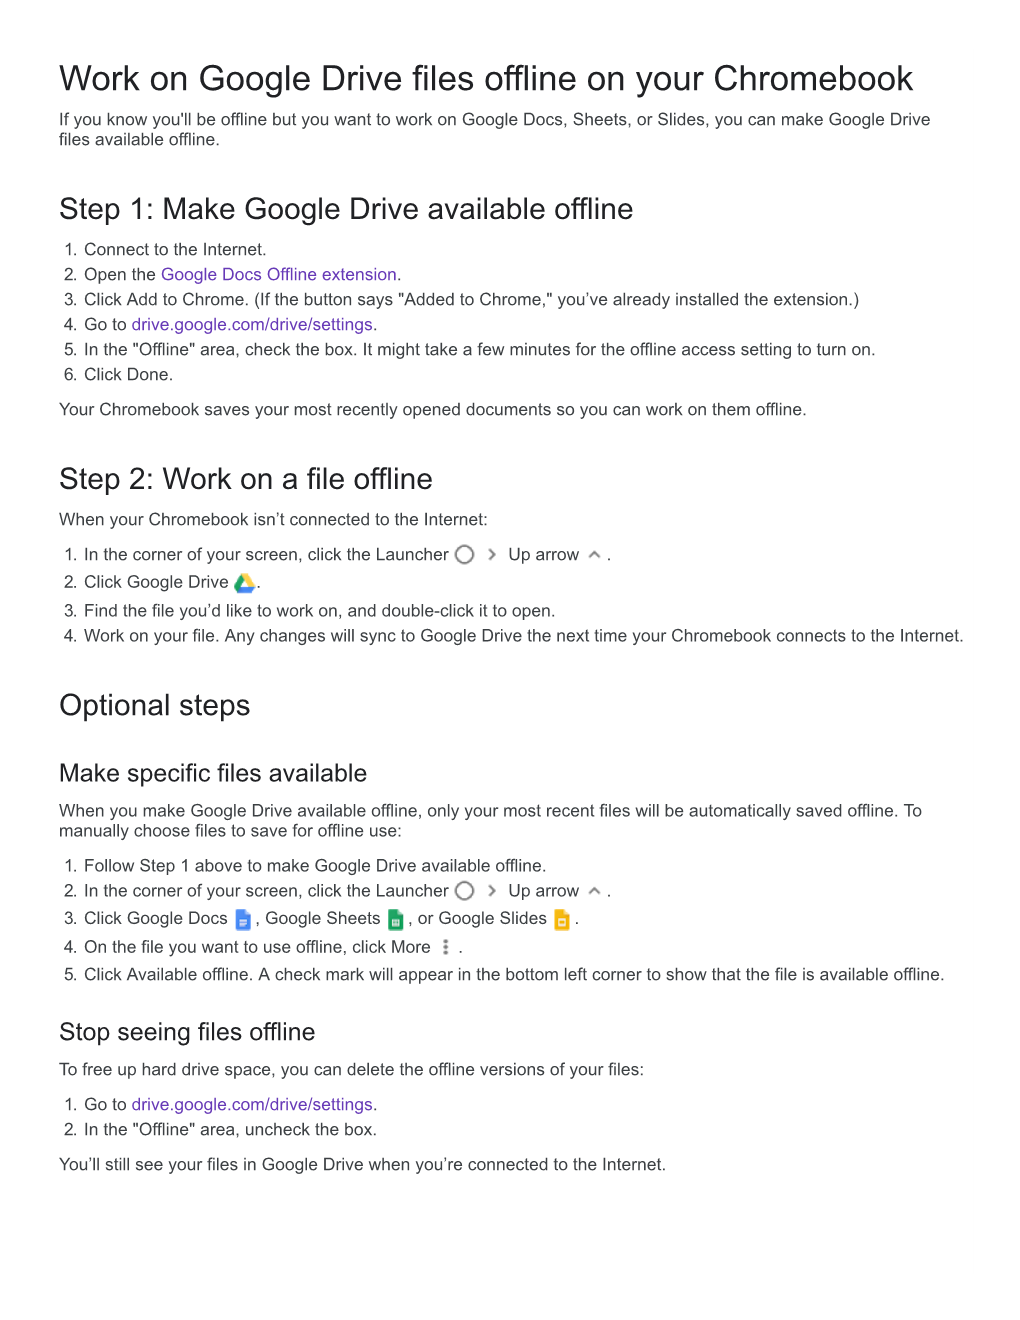 Work on Google Drive Files Offline on Your Chromebook